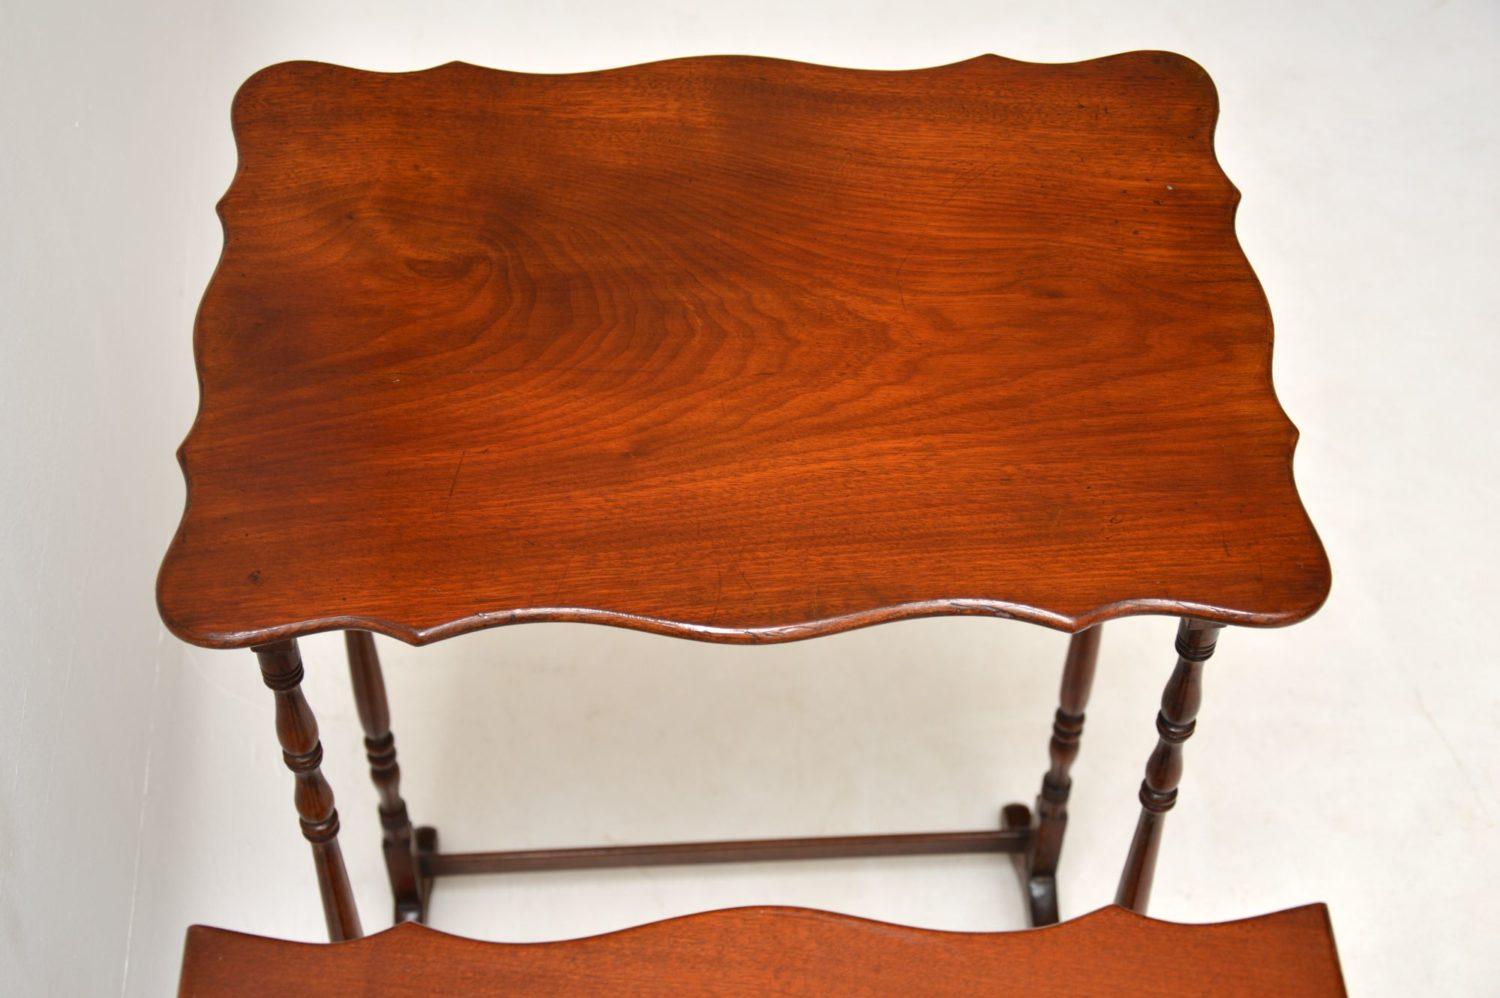 Antique Mahogany Nest of Four Tables 1